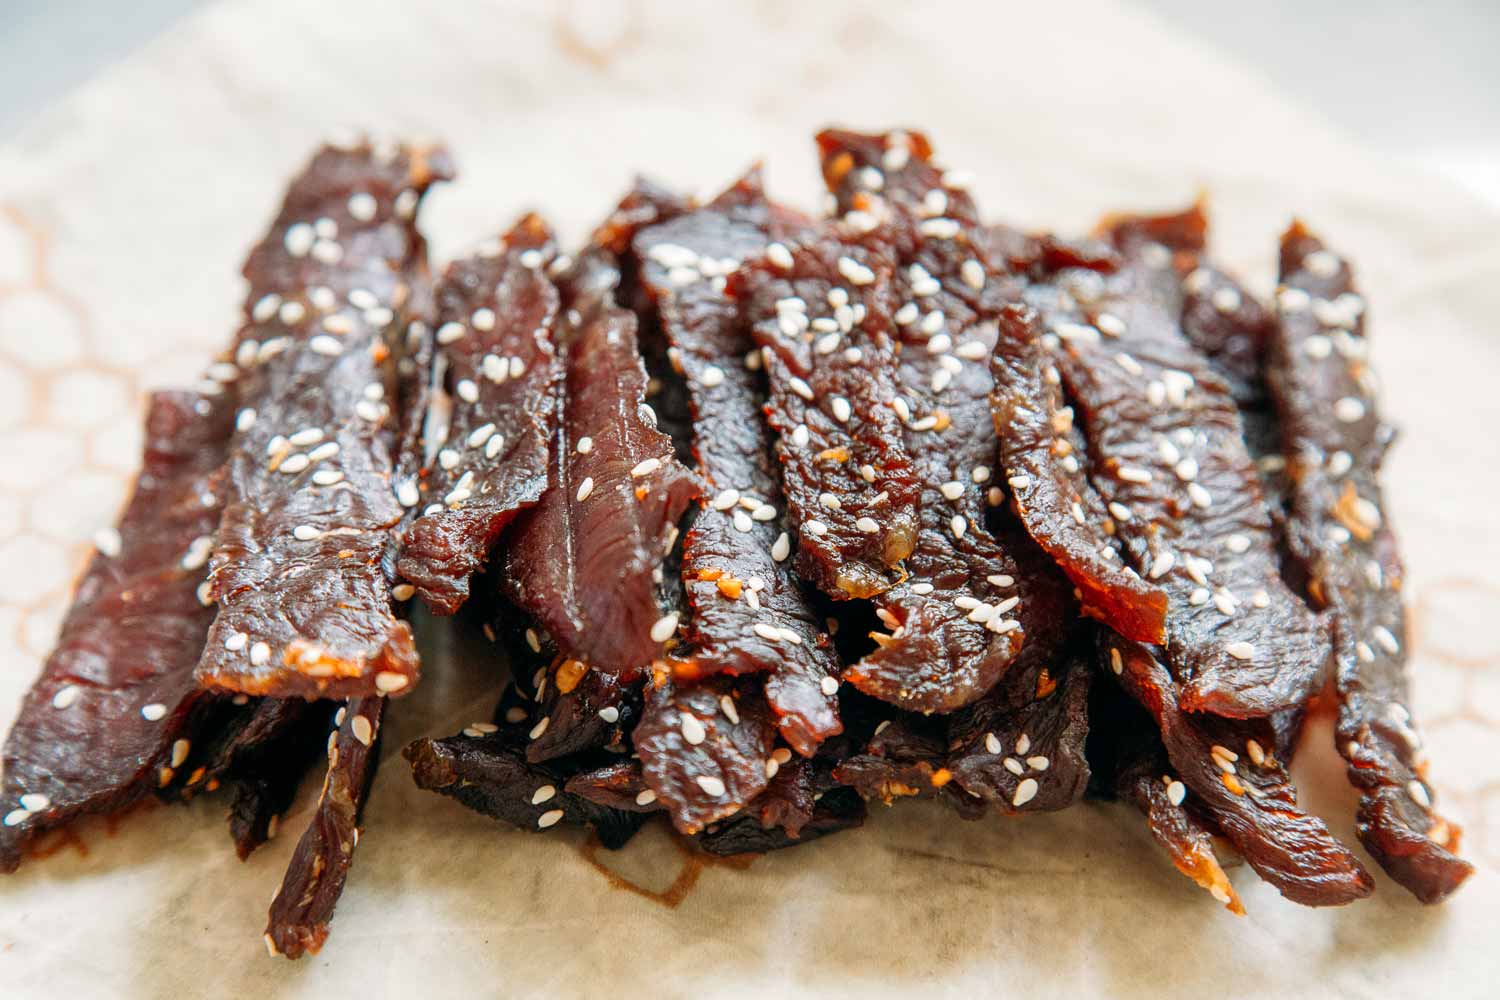 What happens if you freeze beef jerky? – Eating Expired